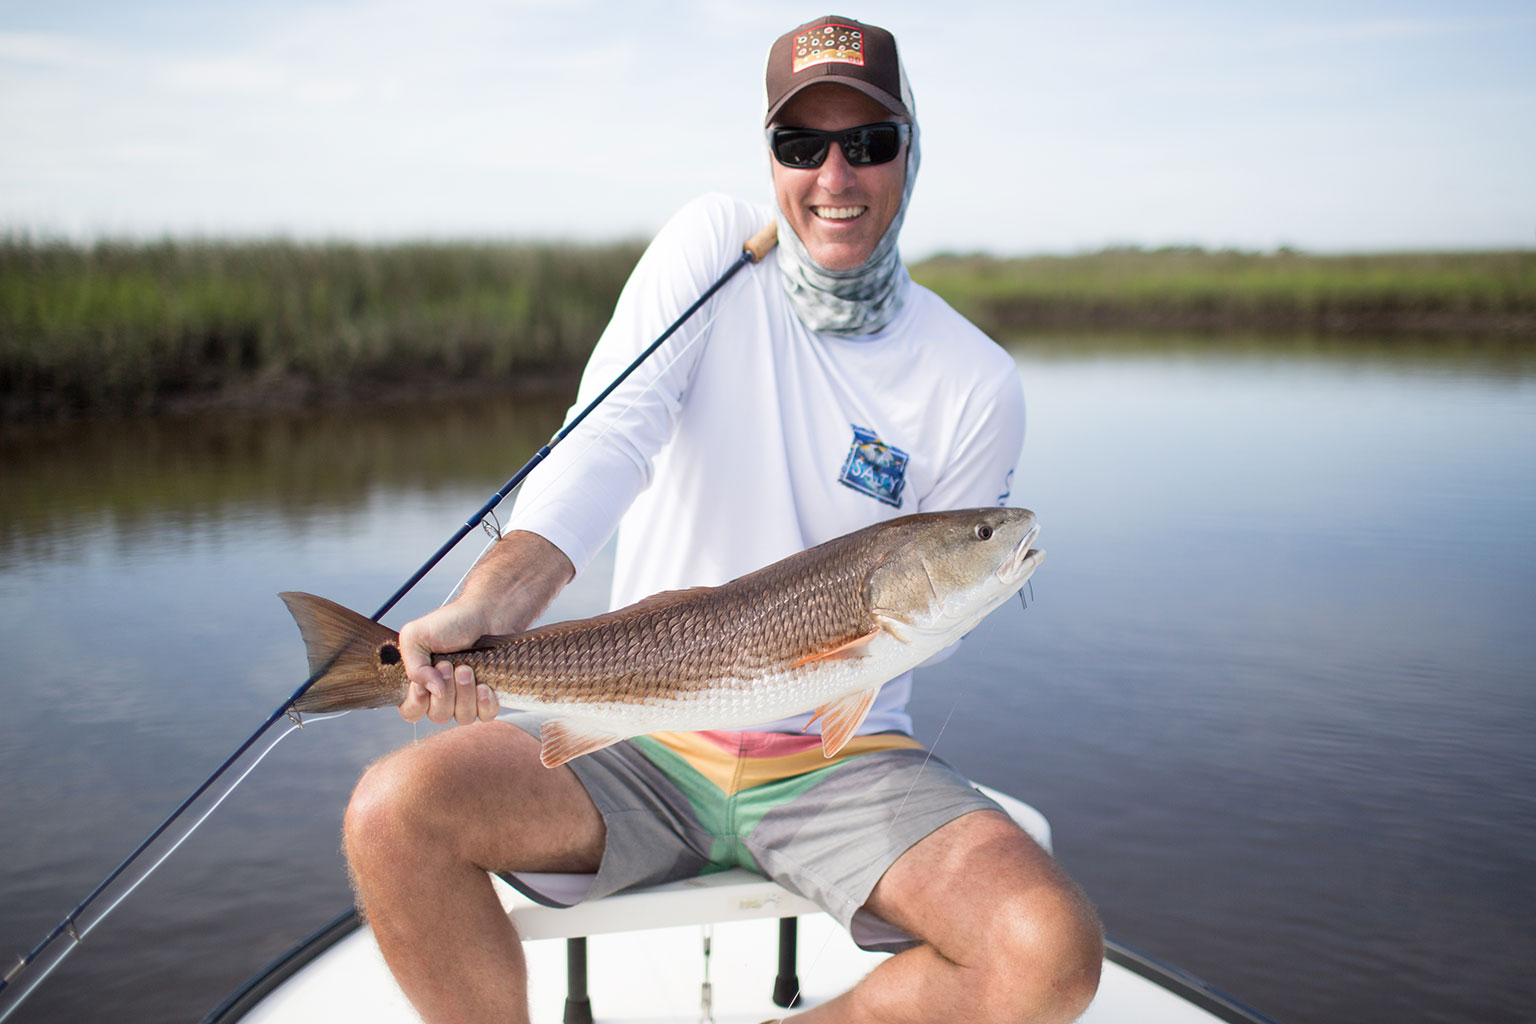 Jacksonville Fishing Charter, Fly Fishing Jacksonville, Redfish Jacksonville, Florida Fishing Charter, Hells Bay Whipray, Fishing Guide